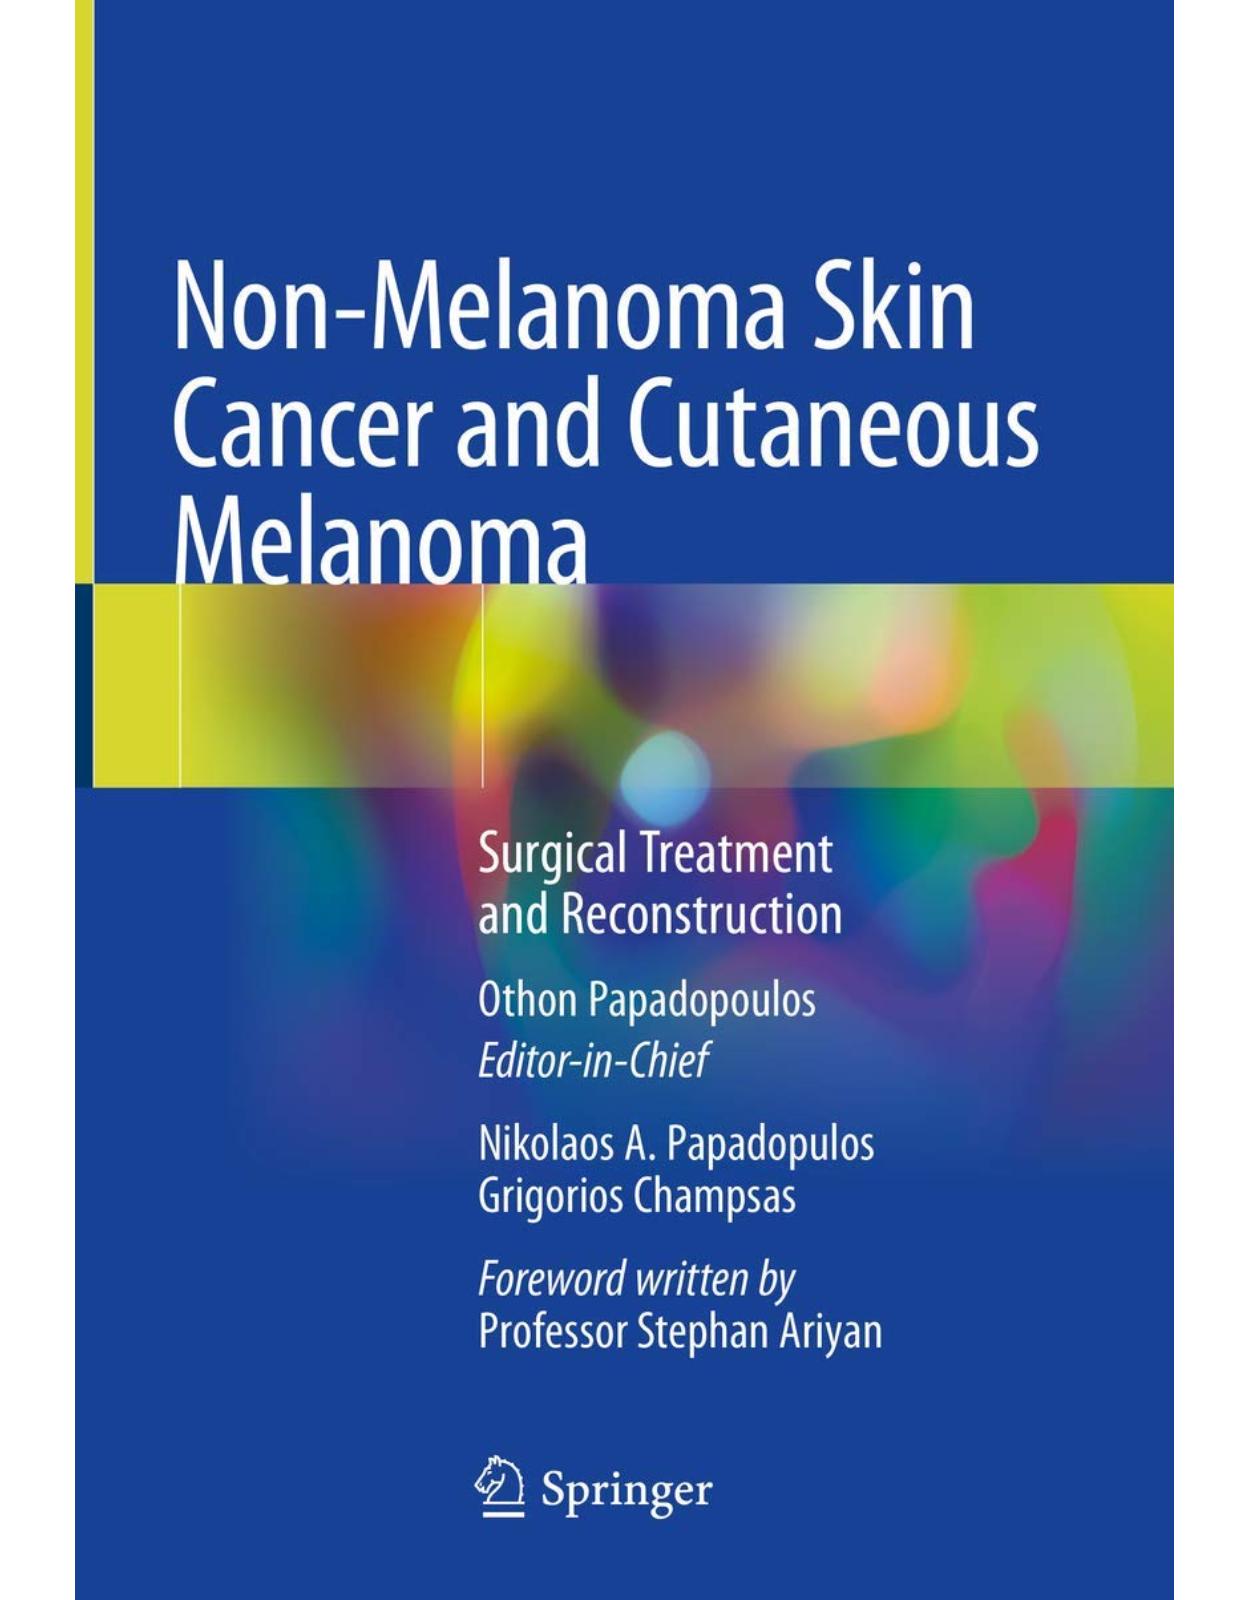 Non-Melanoma Skin Cancer and Cutaneous Melanoma. Surgical Treatment and Reconstruction